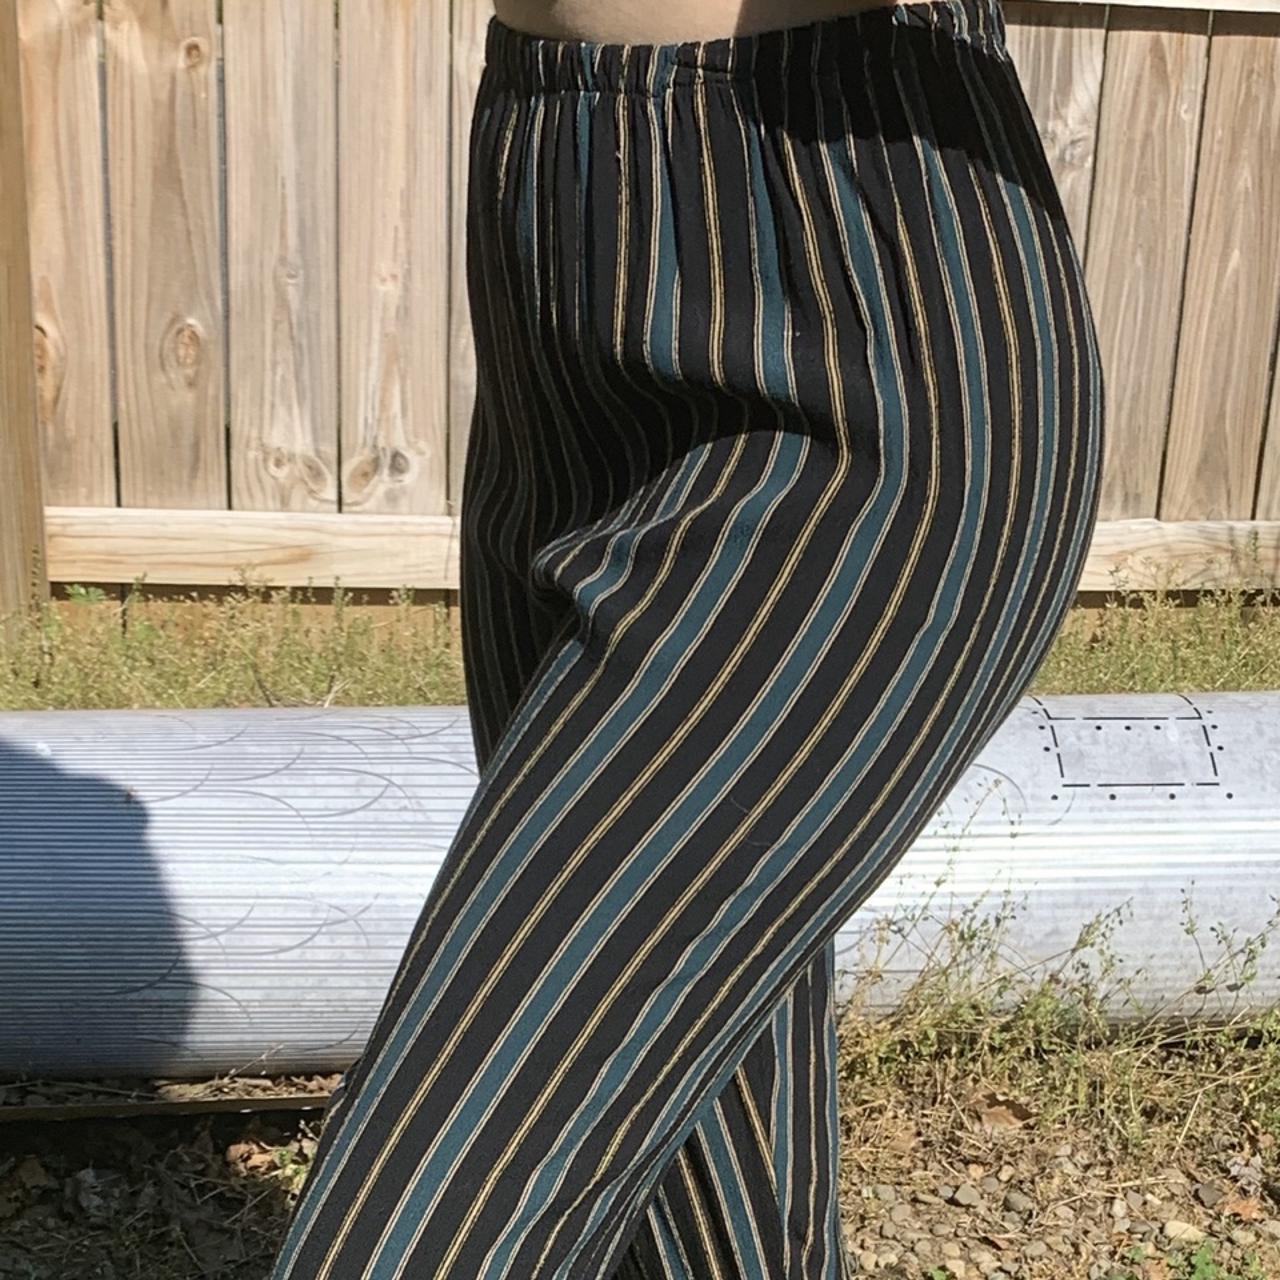 BRANDY MELVILLE Cute STRIPED Cotton Cropped Pants Small Made in ITALY | eBay